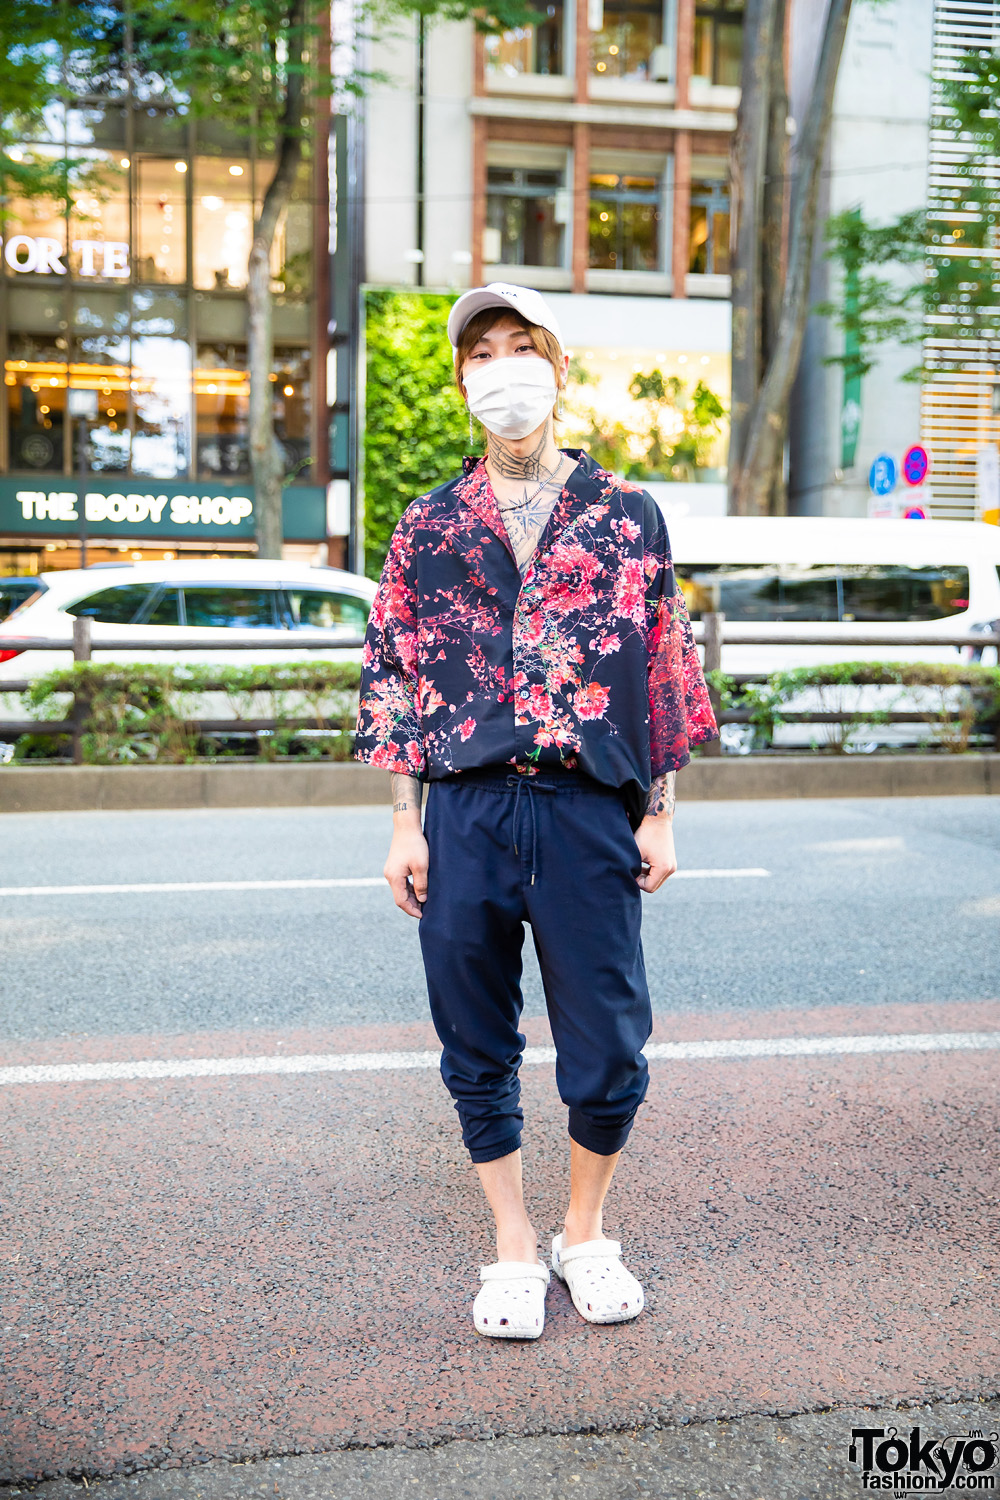 Japanese Host Streetwear Style w/ White Cap, Tattoos, Mismatched